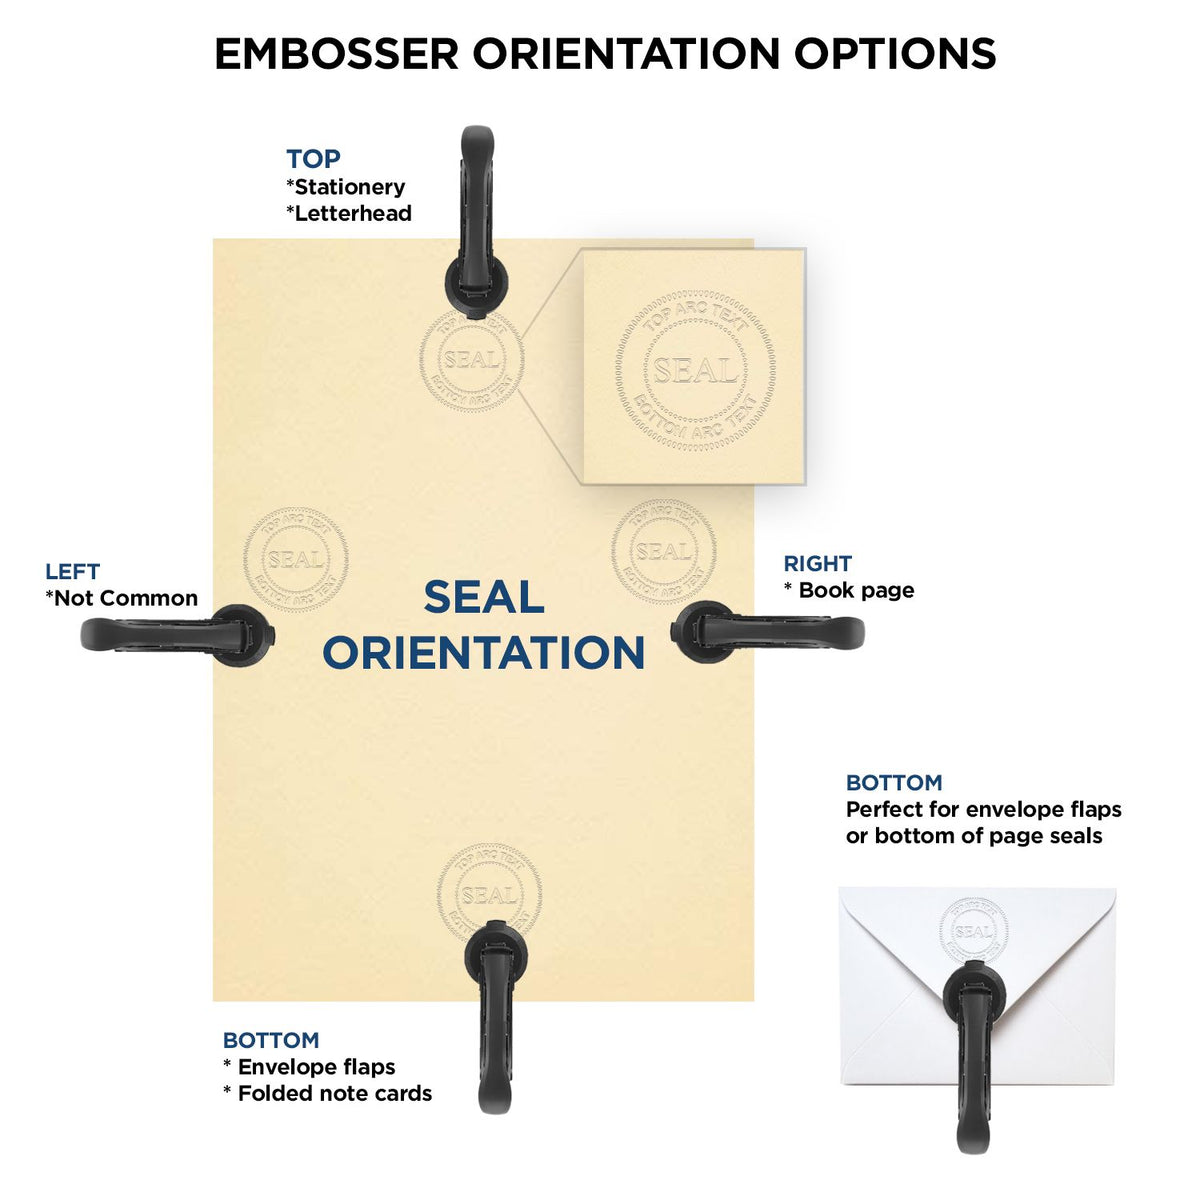 An infographic for the Handheld New York Architect Seal Embosser showing embosser orientation, this is showing examples of a top, bottom, right and left insert.